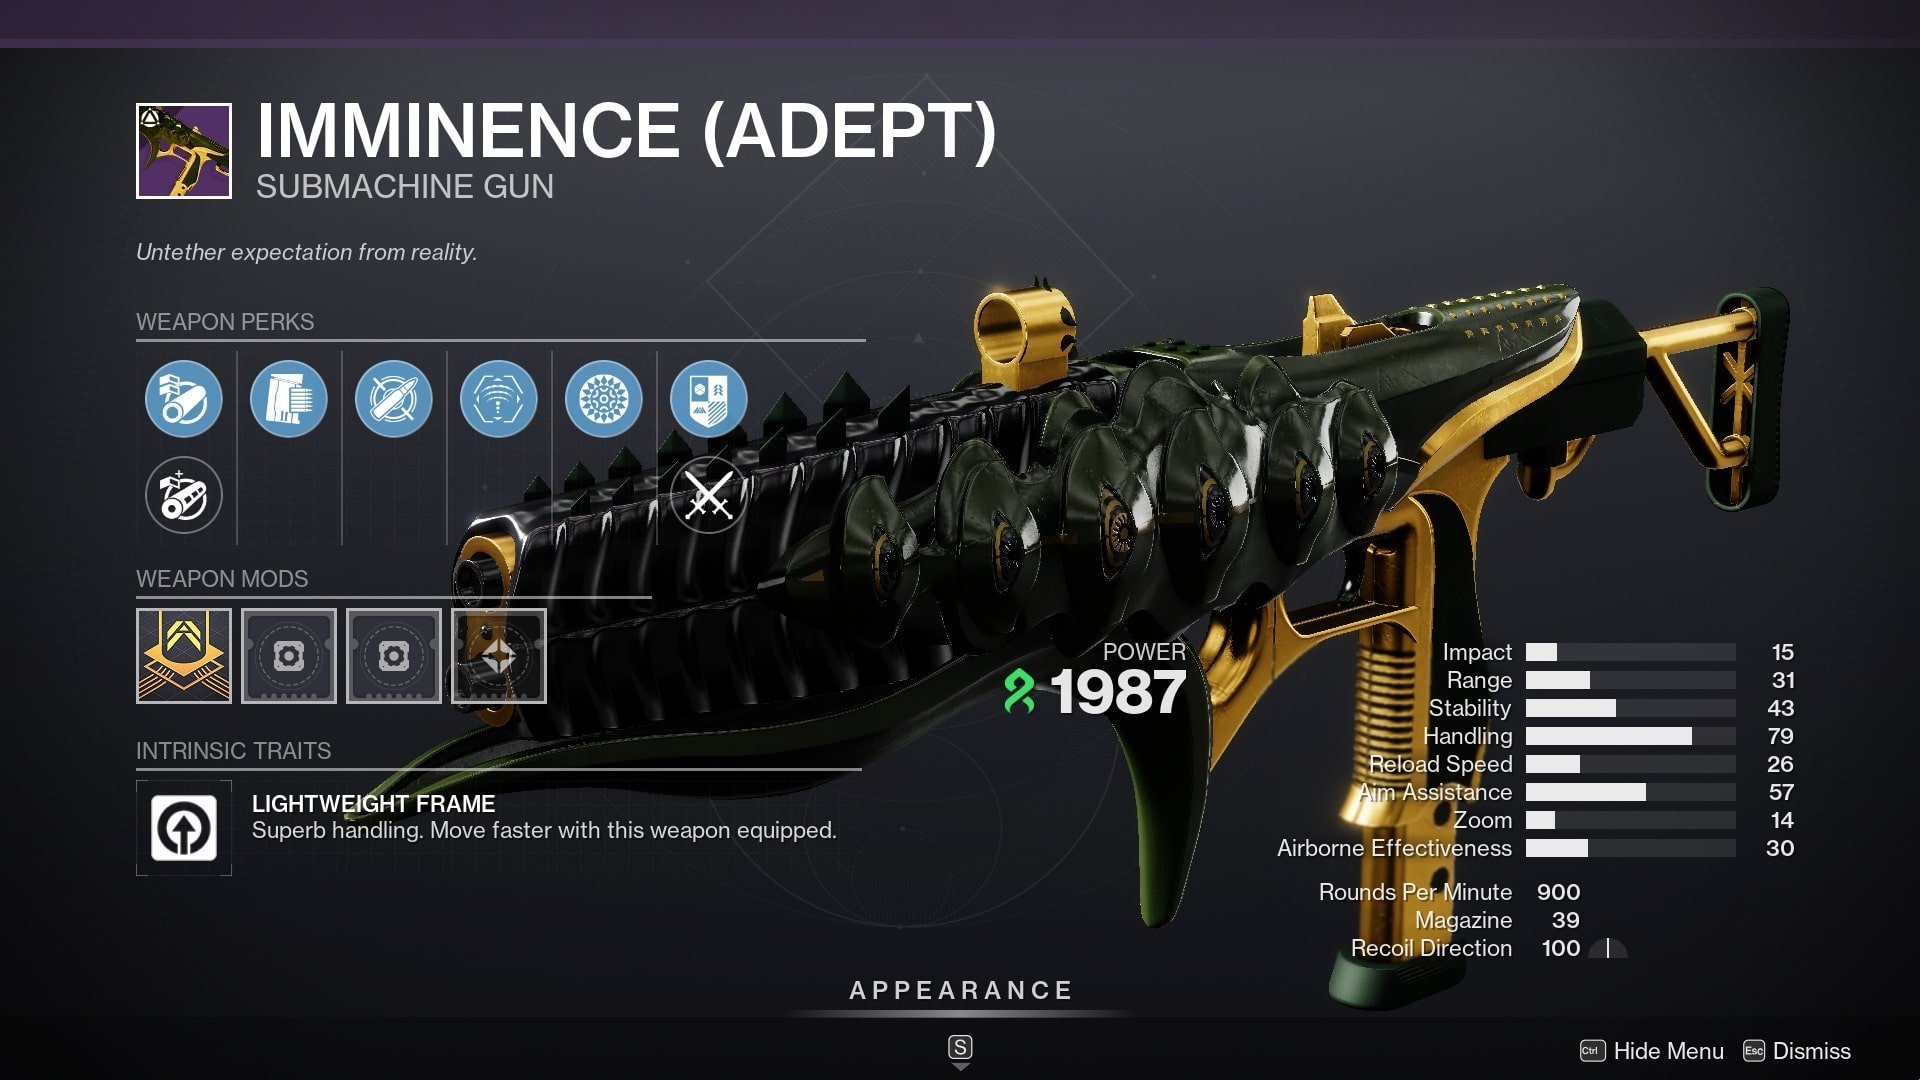 Imminence adept smg